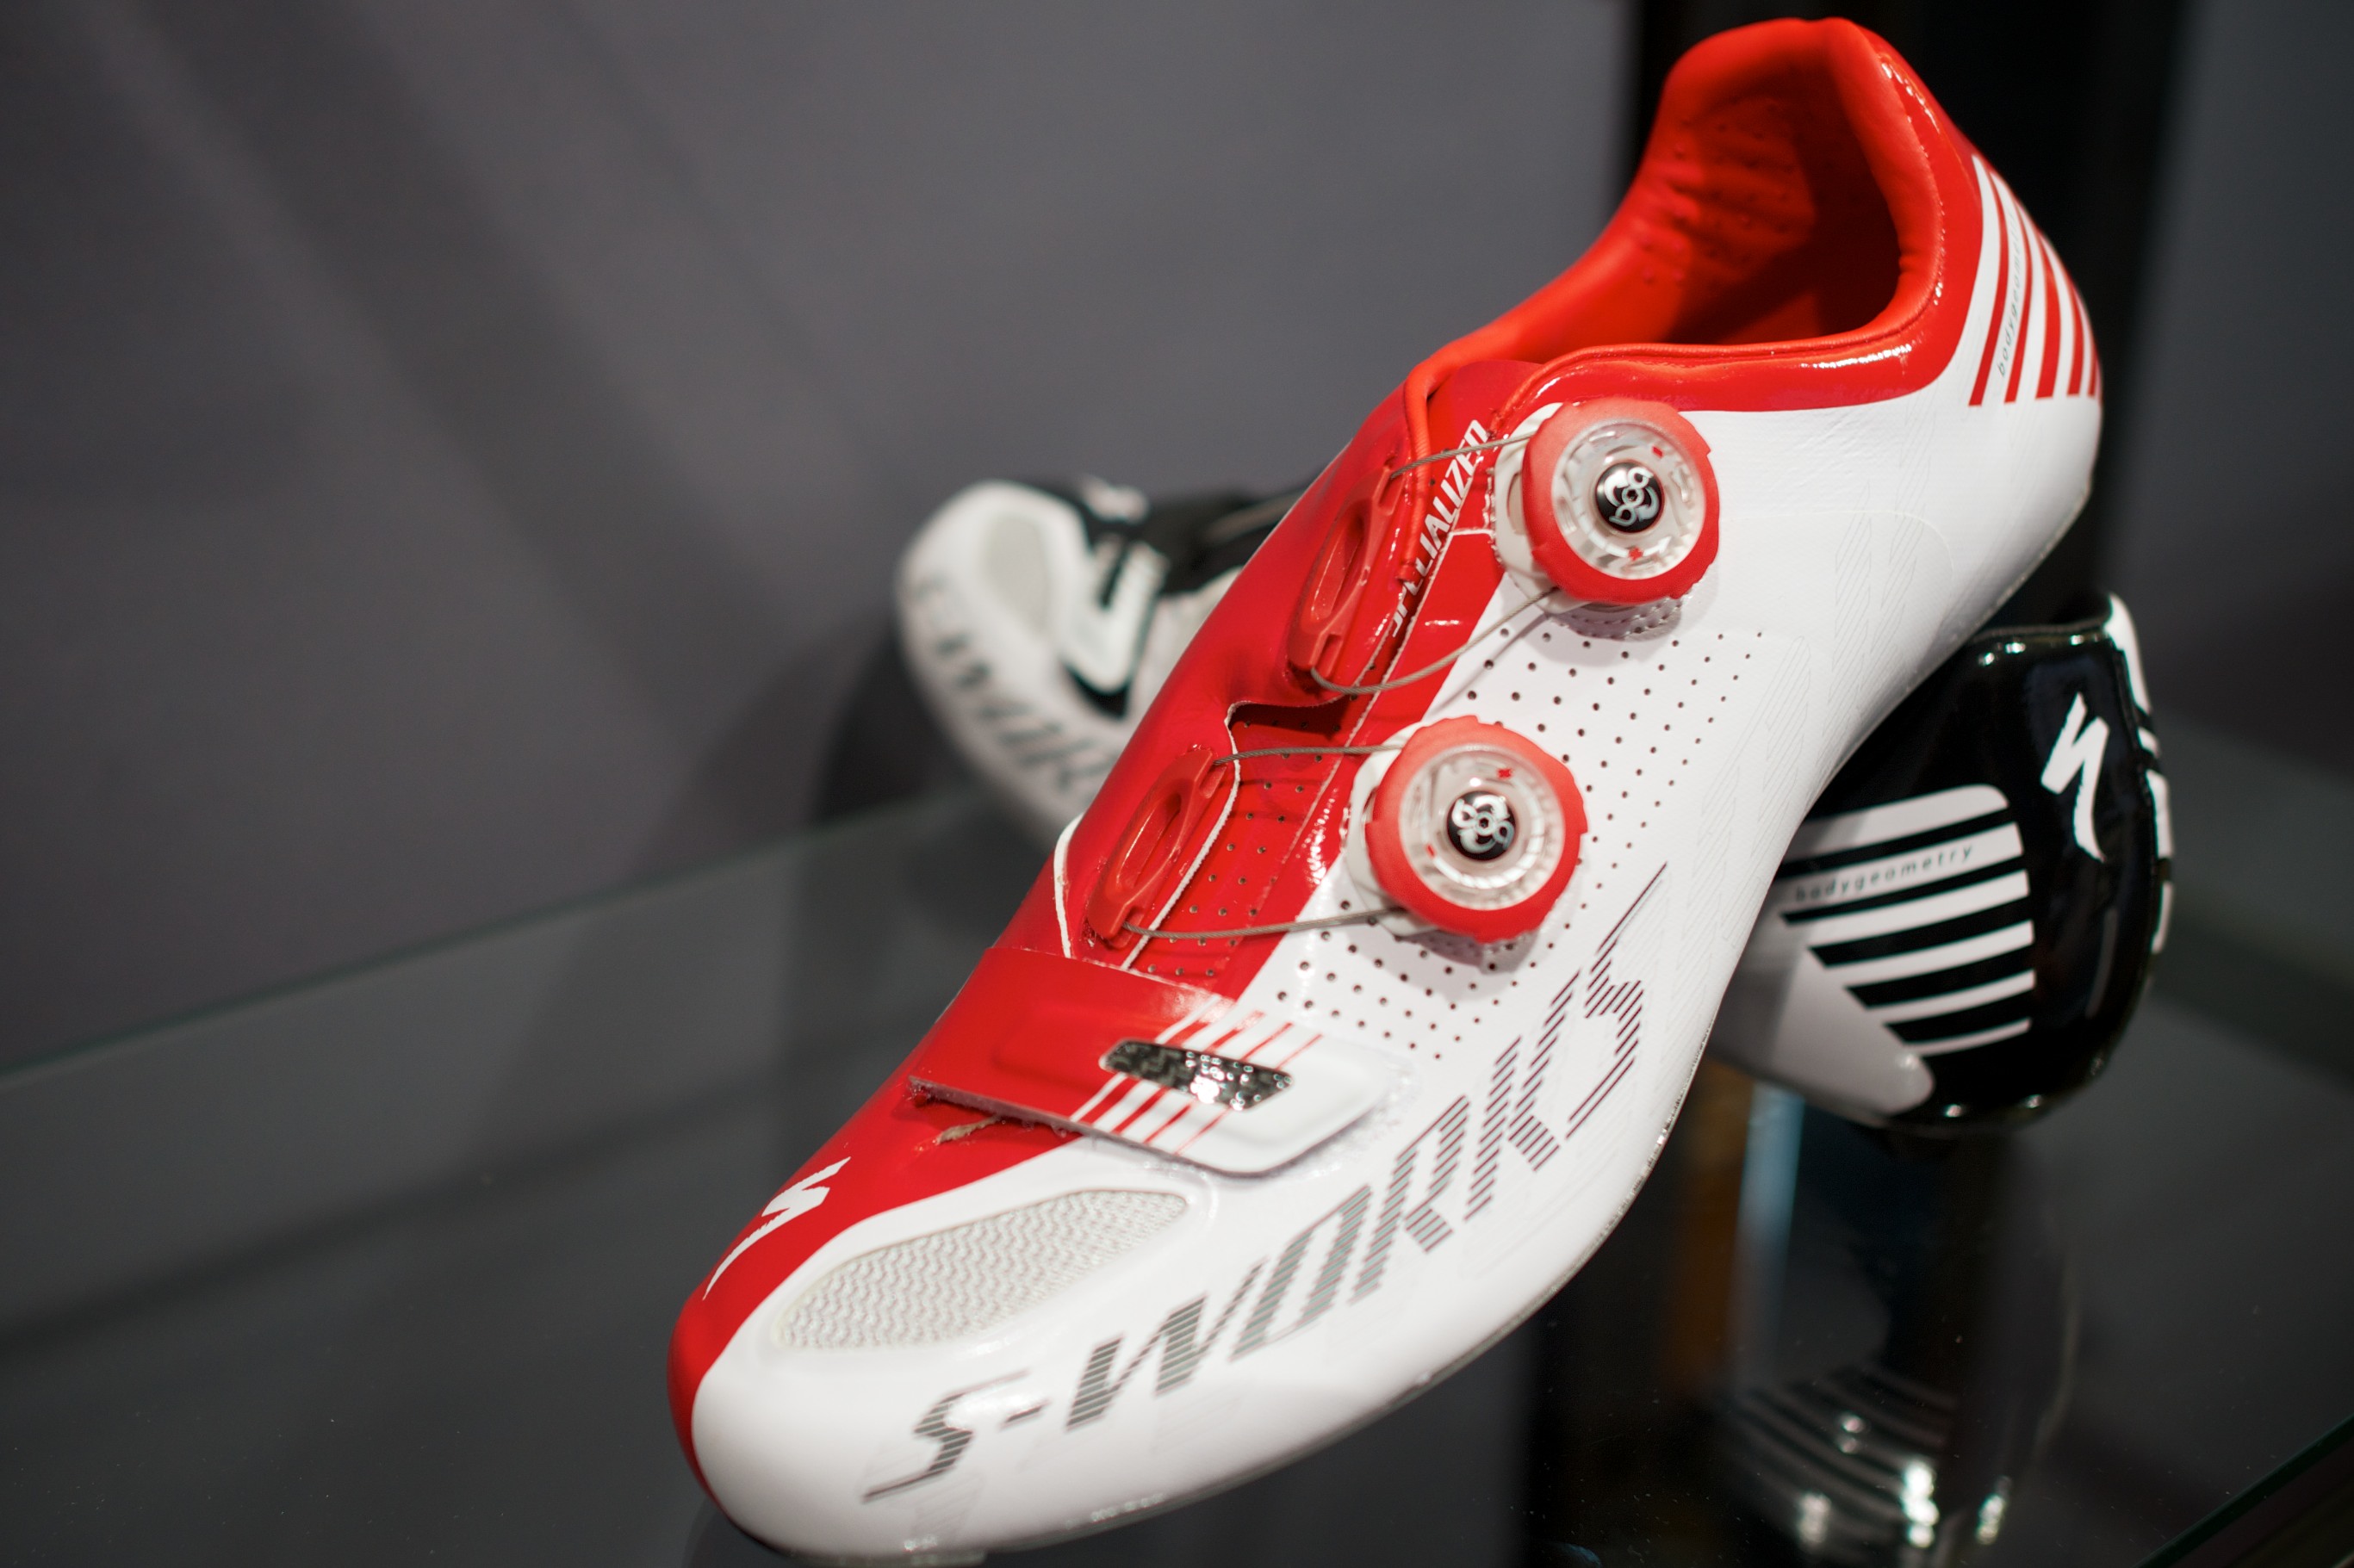 Reworked, S-Works shoes